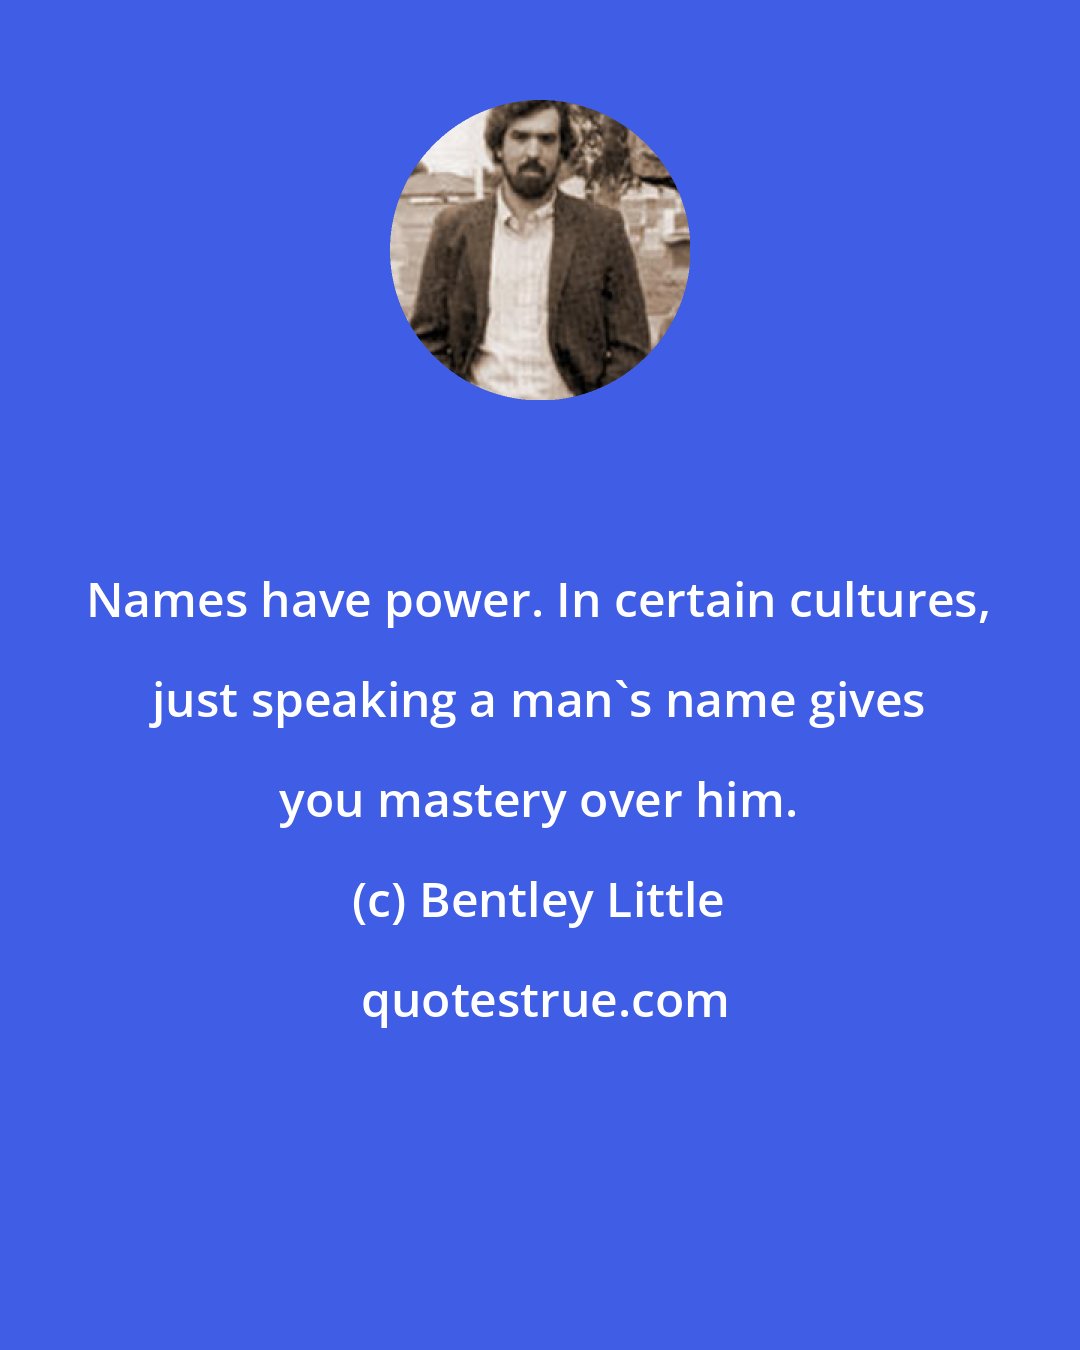 Bentley Little: Names have power. In certain cultures, just speaking a man's name gives you mastery over him.